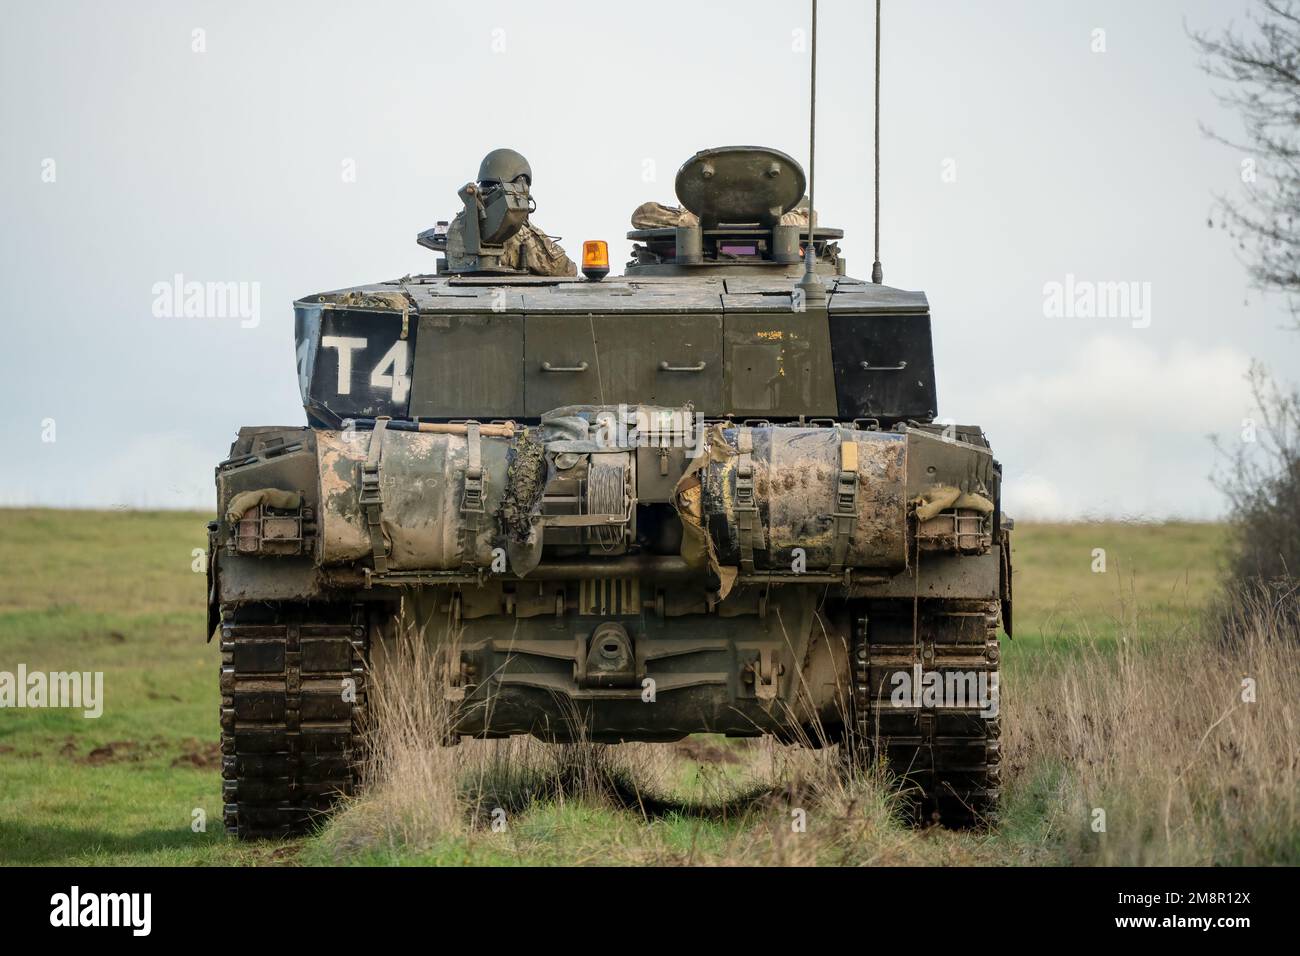 close-up of a British army FV4034 Challenger 2 ii main battle tank in action on a military combat exercise,Wiltshire UK Stock Photo